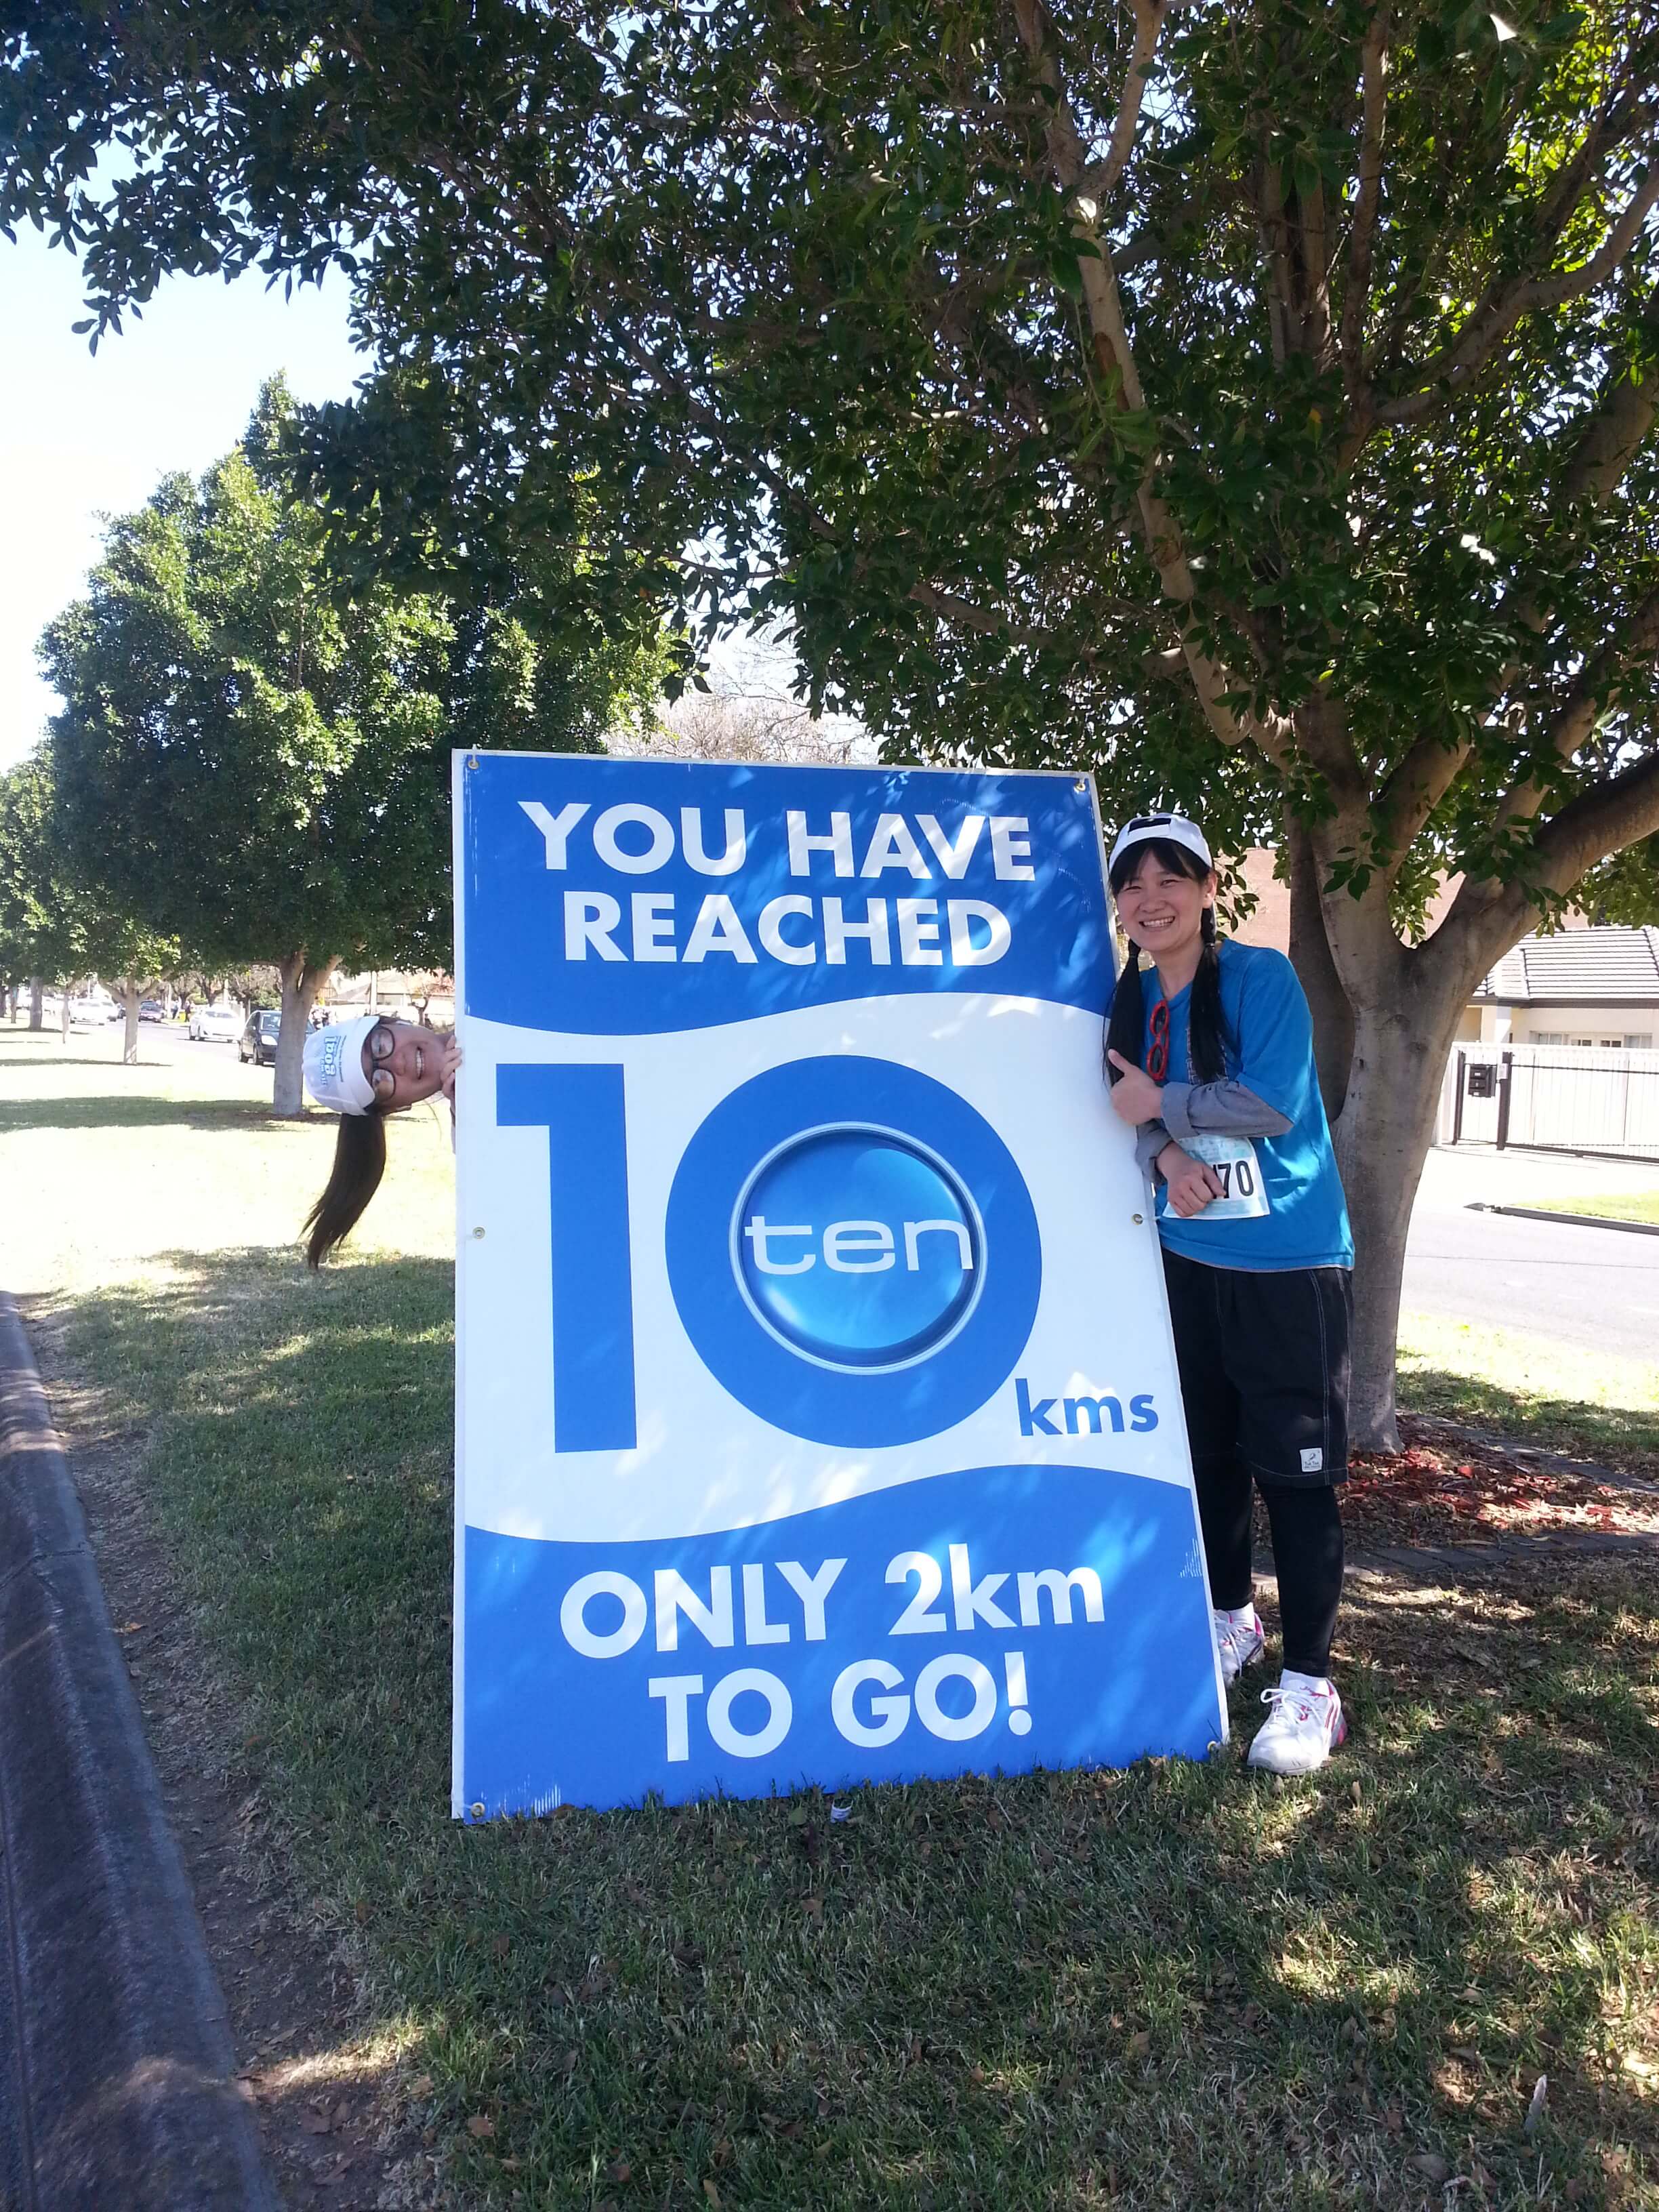 hannah at channel 10 ten kms record reached